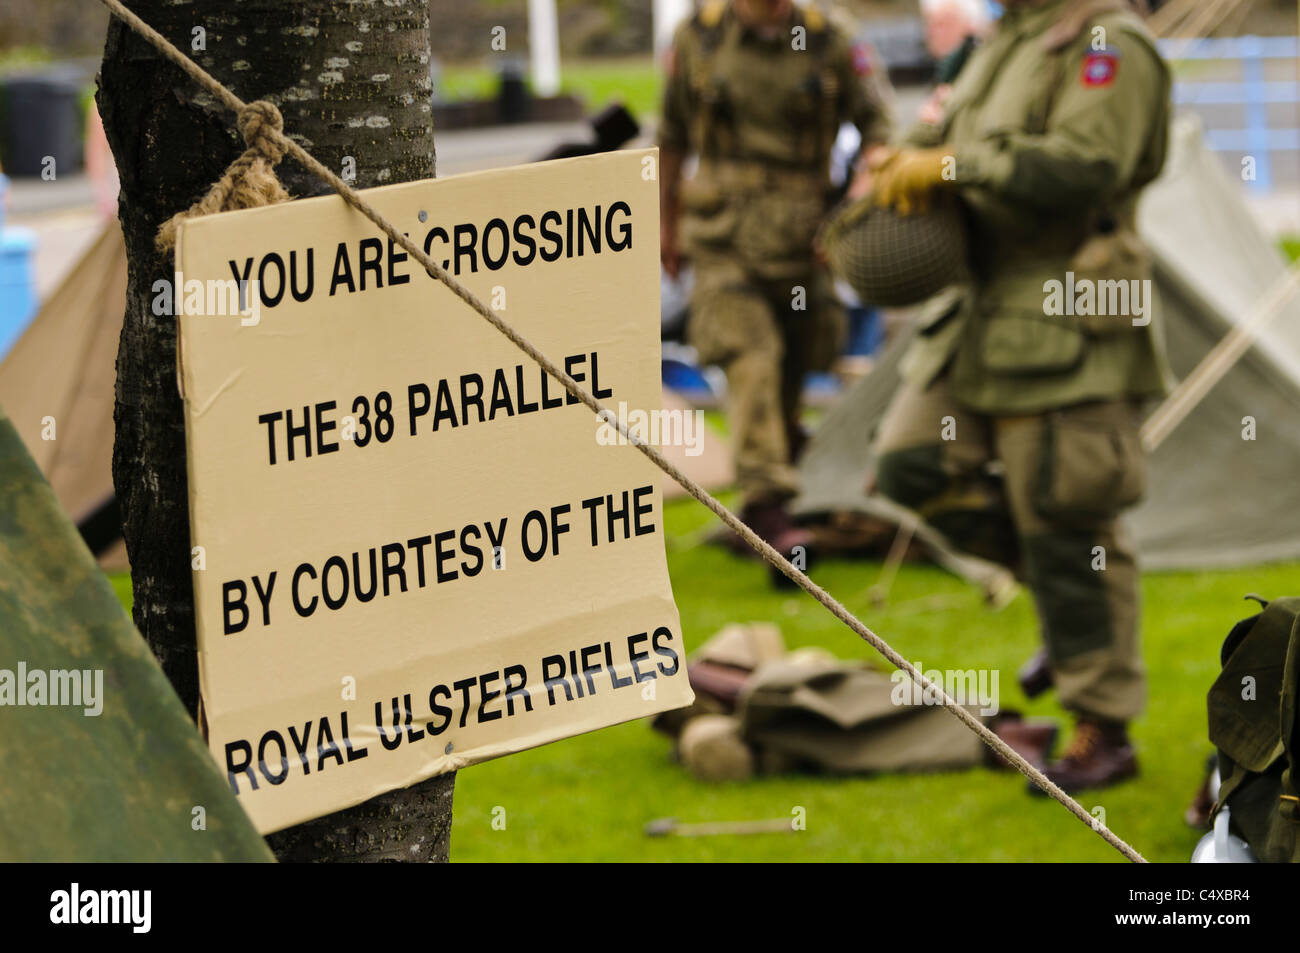 Sign 'You are crossing the 38 parallel by courtesy of the Royal Ulster Rifles' Stock Photo